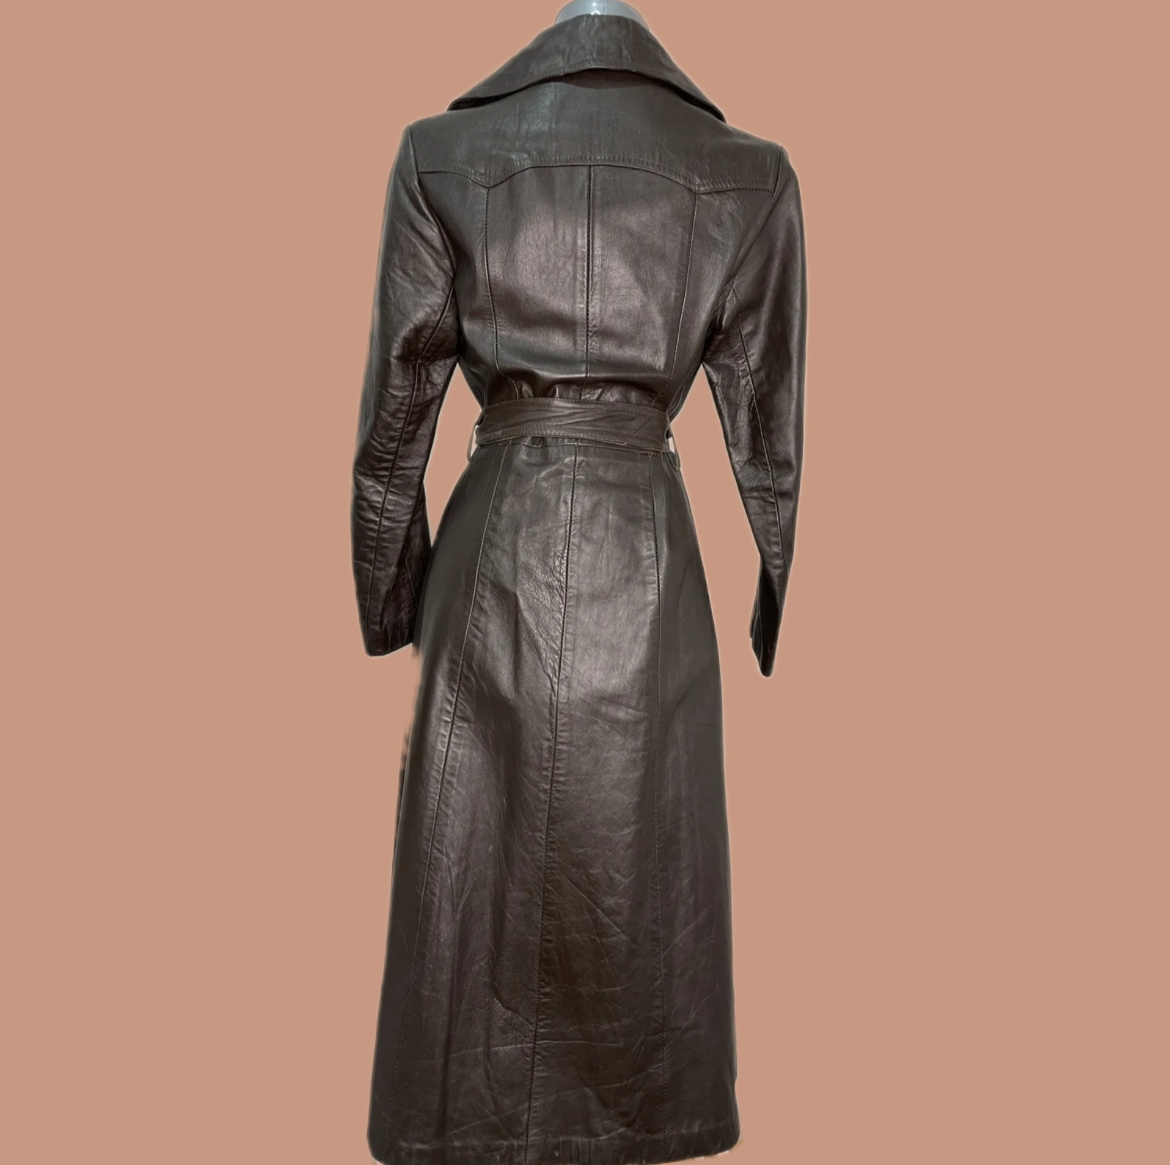 Vintage brown leather spy trench coat